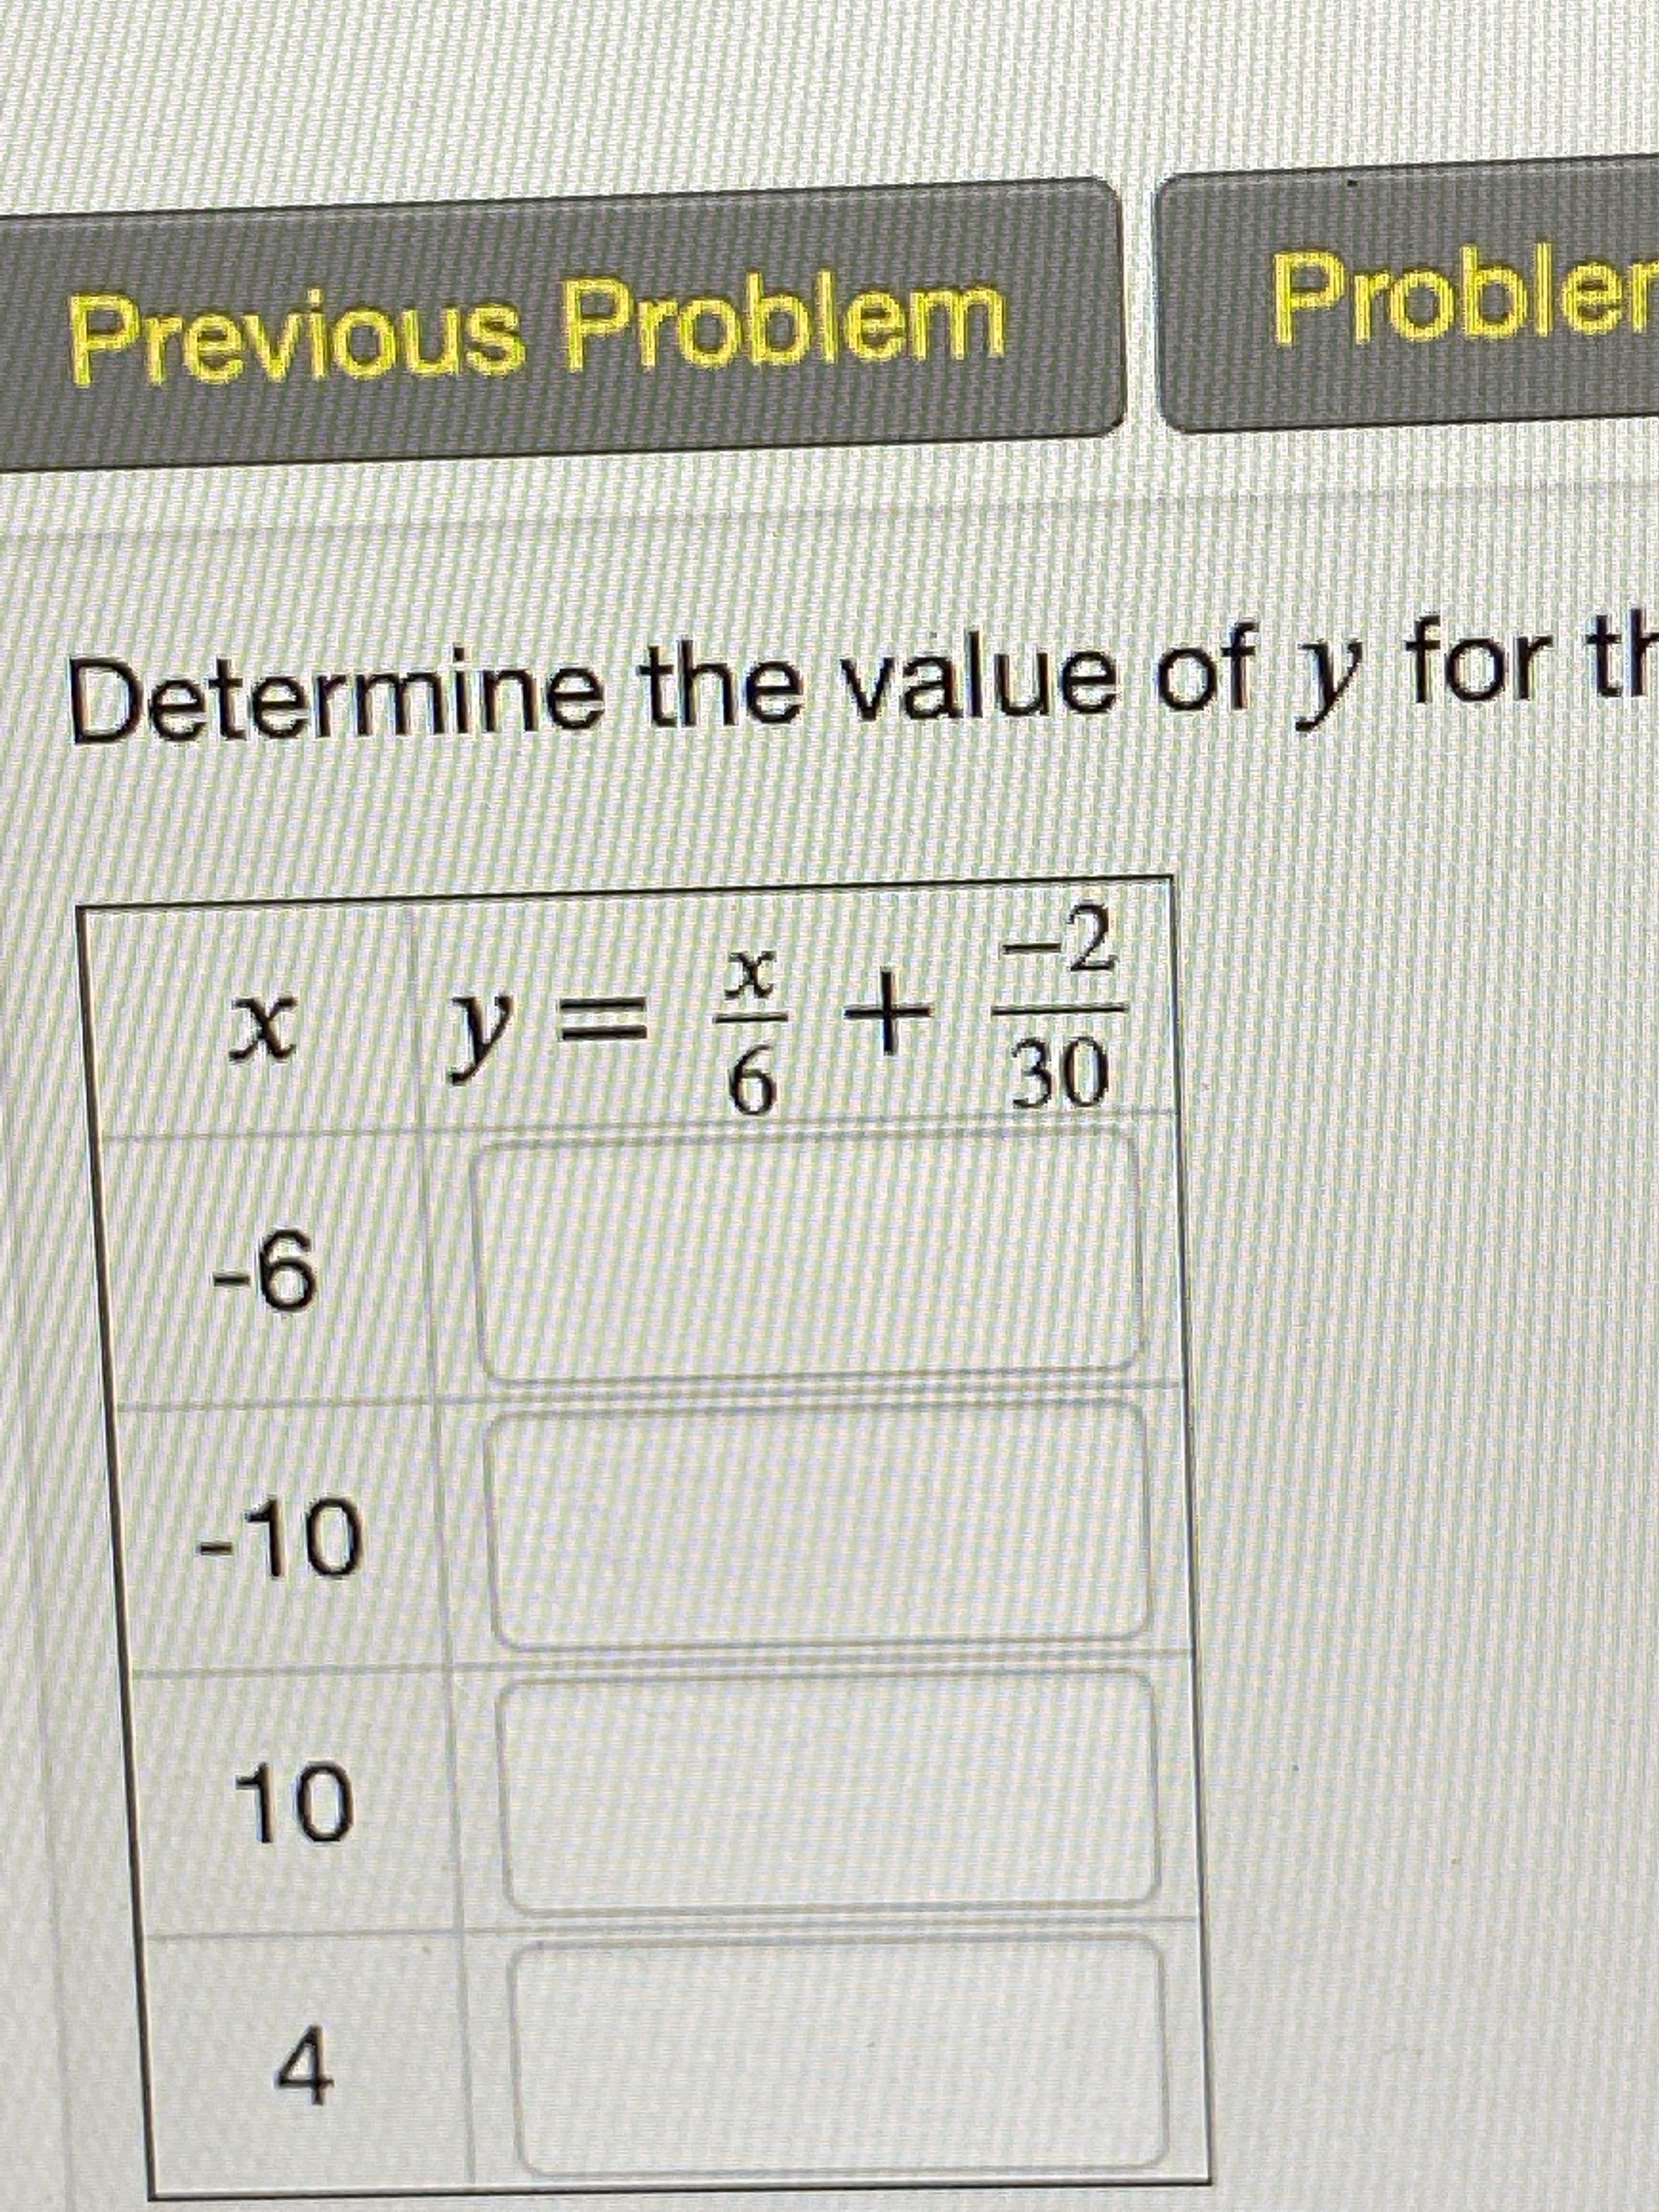 Determine the value of y
